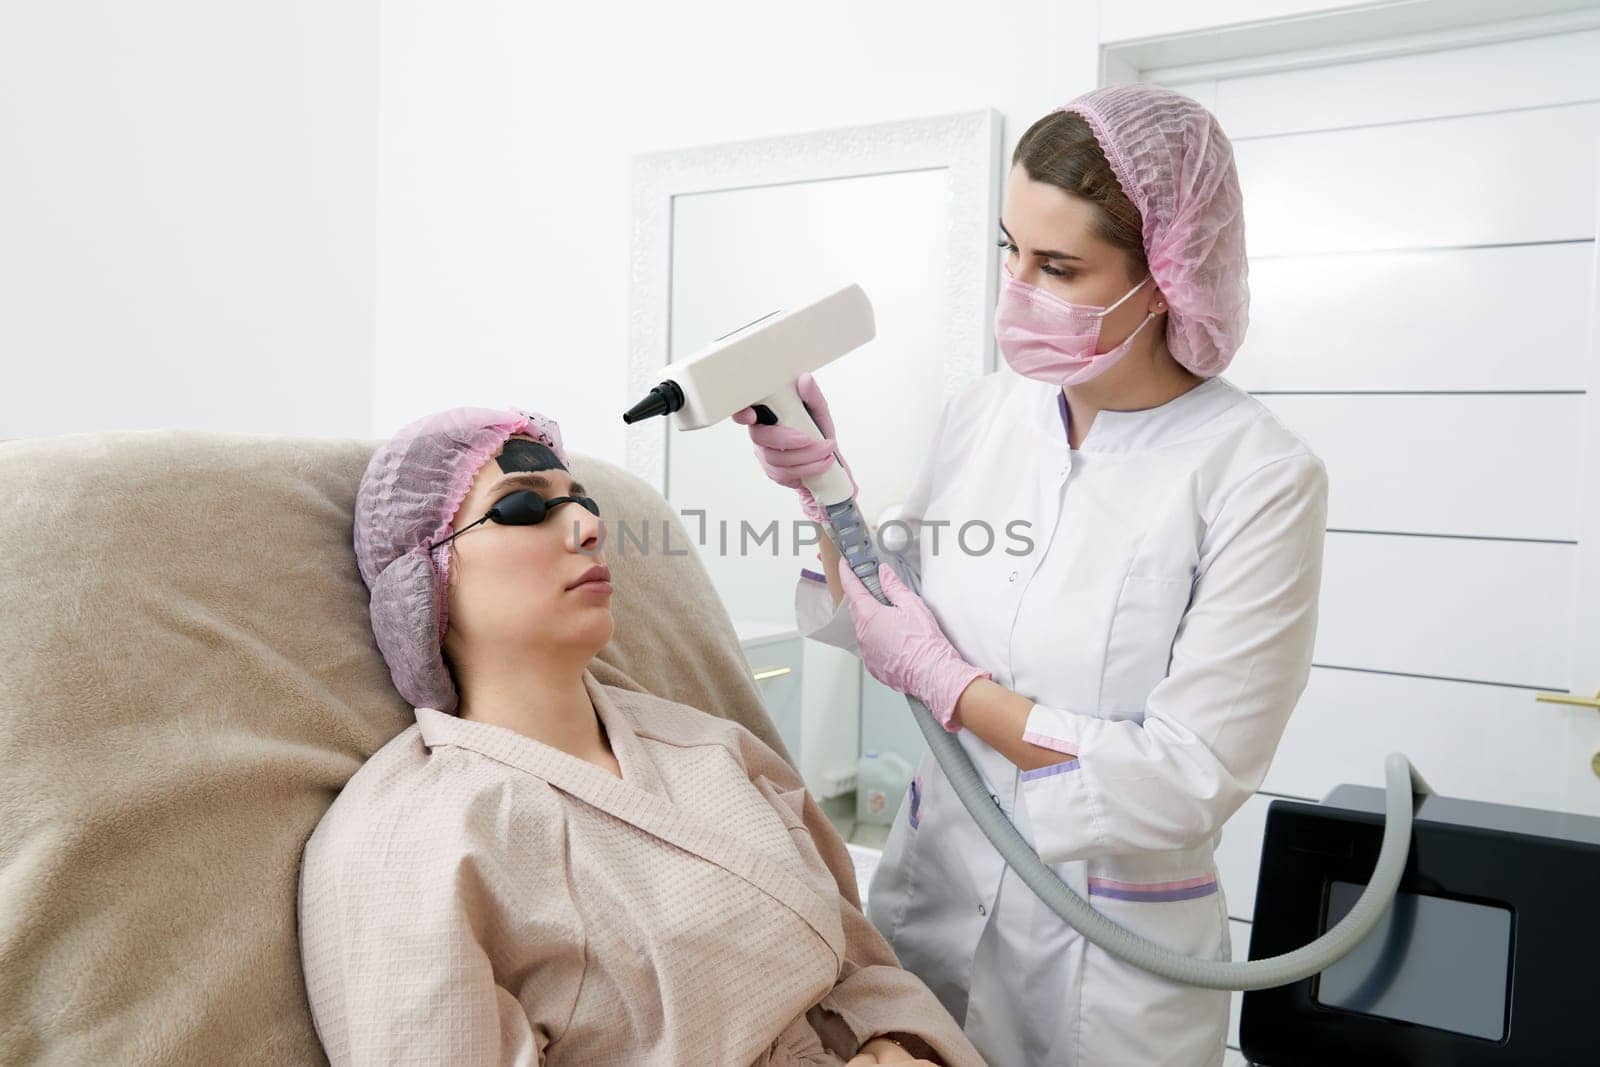 Carbon peeling in beauty salon. Cosmetologist performing carbon peeling to a young woman by Mariakray